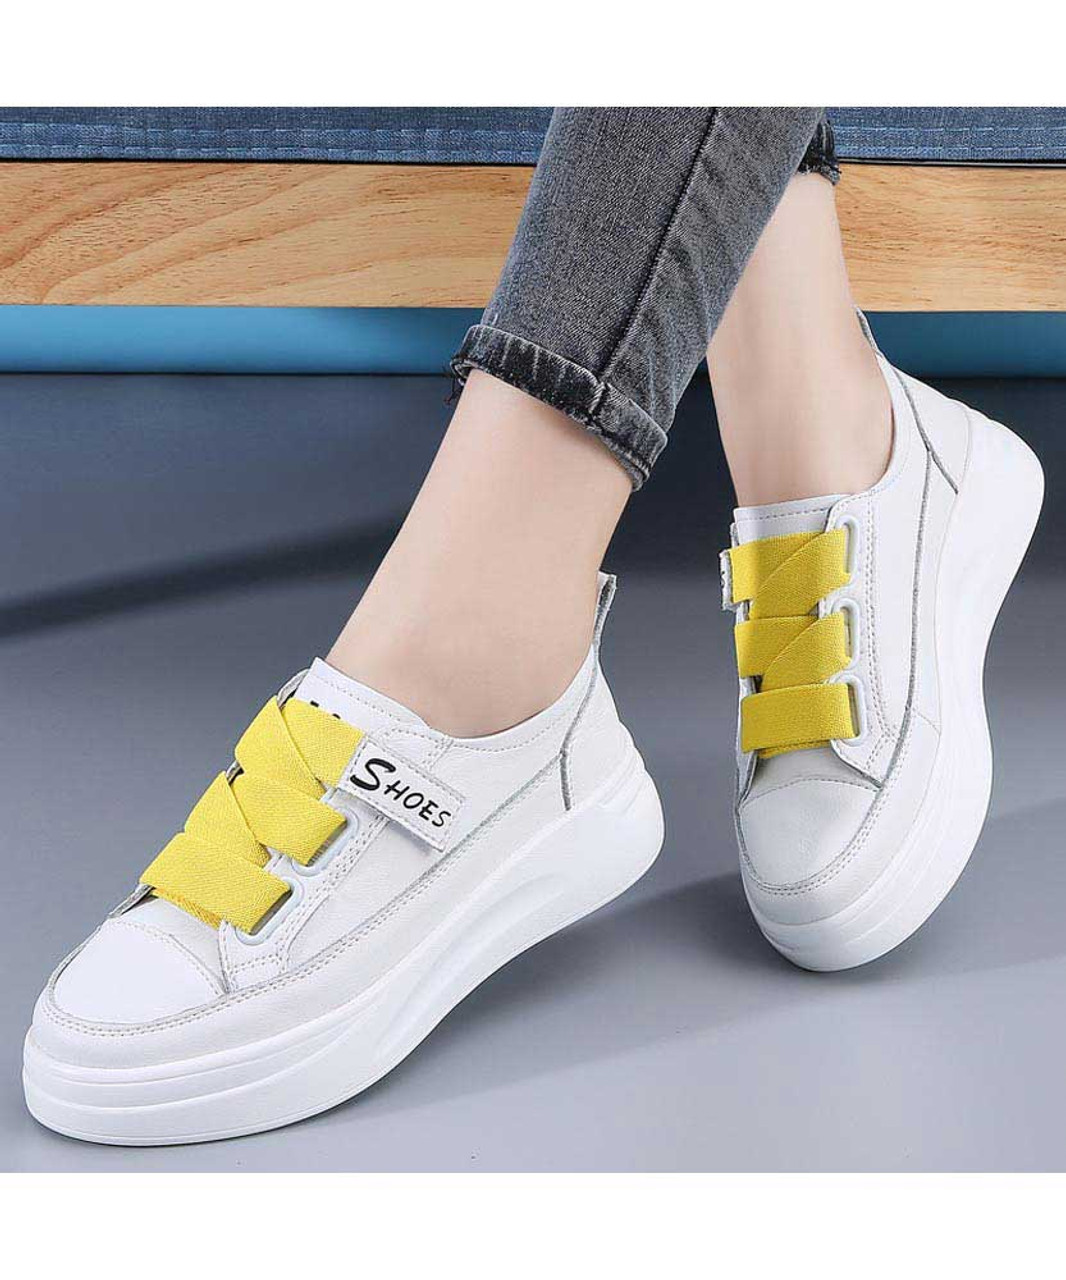 White yellow wide lace platform shoe sneaker | Womens sneakers shoes ...